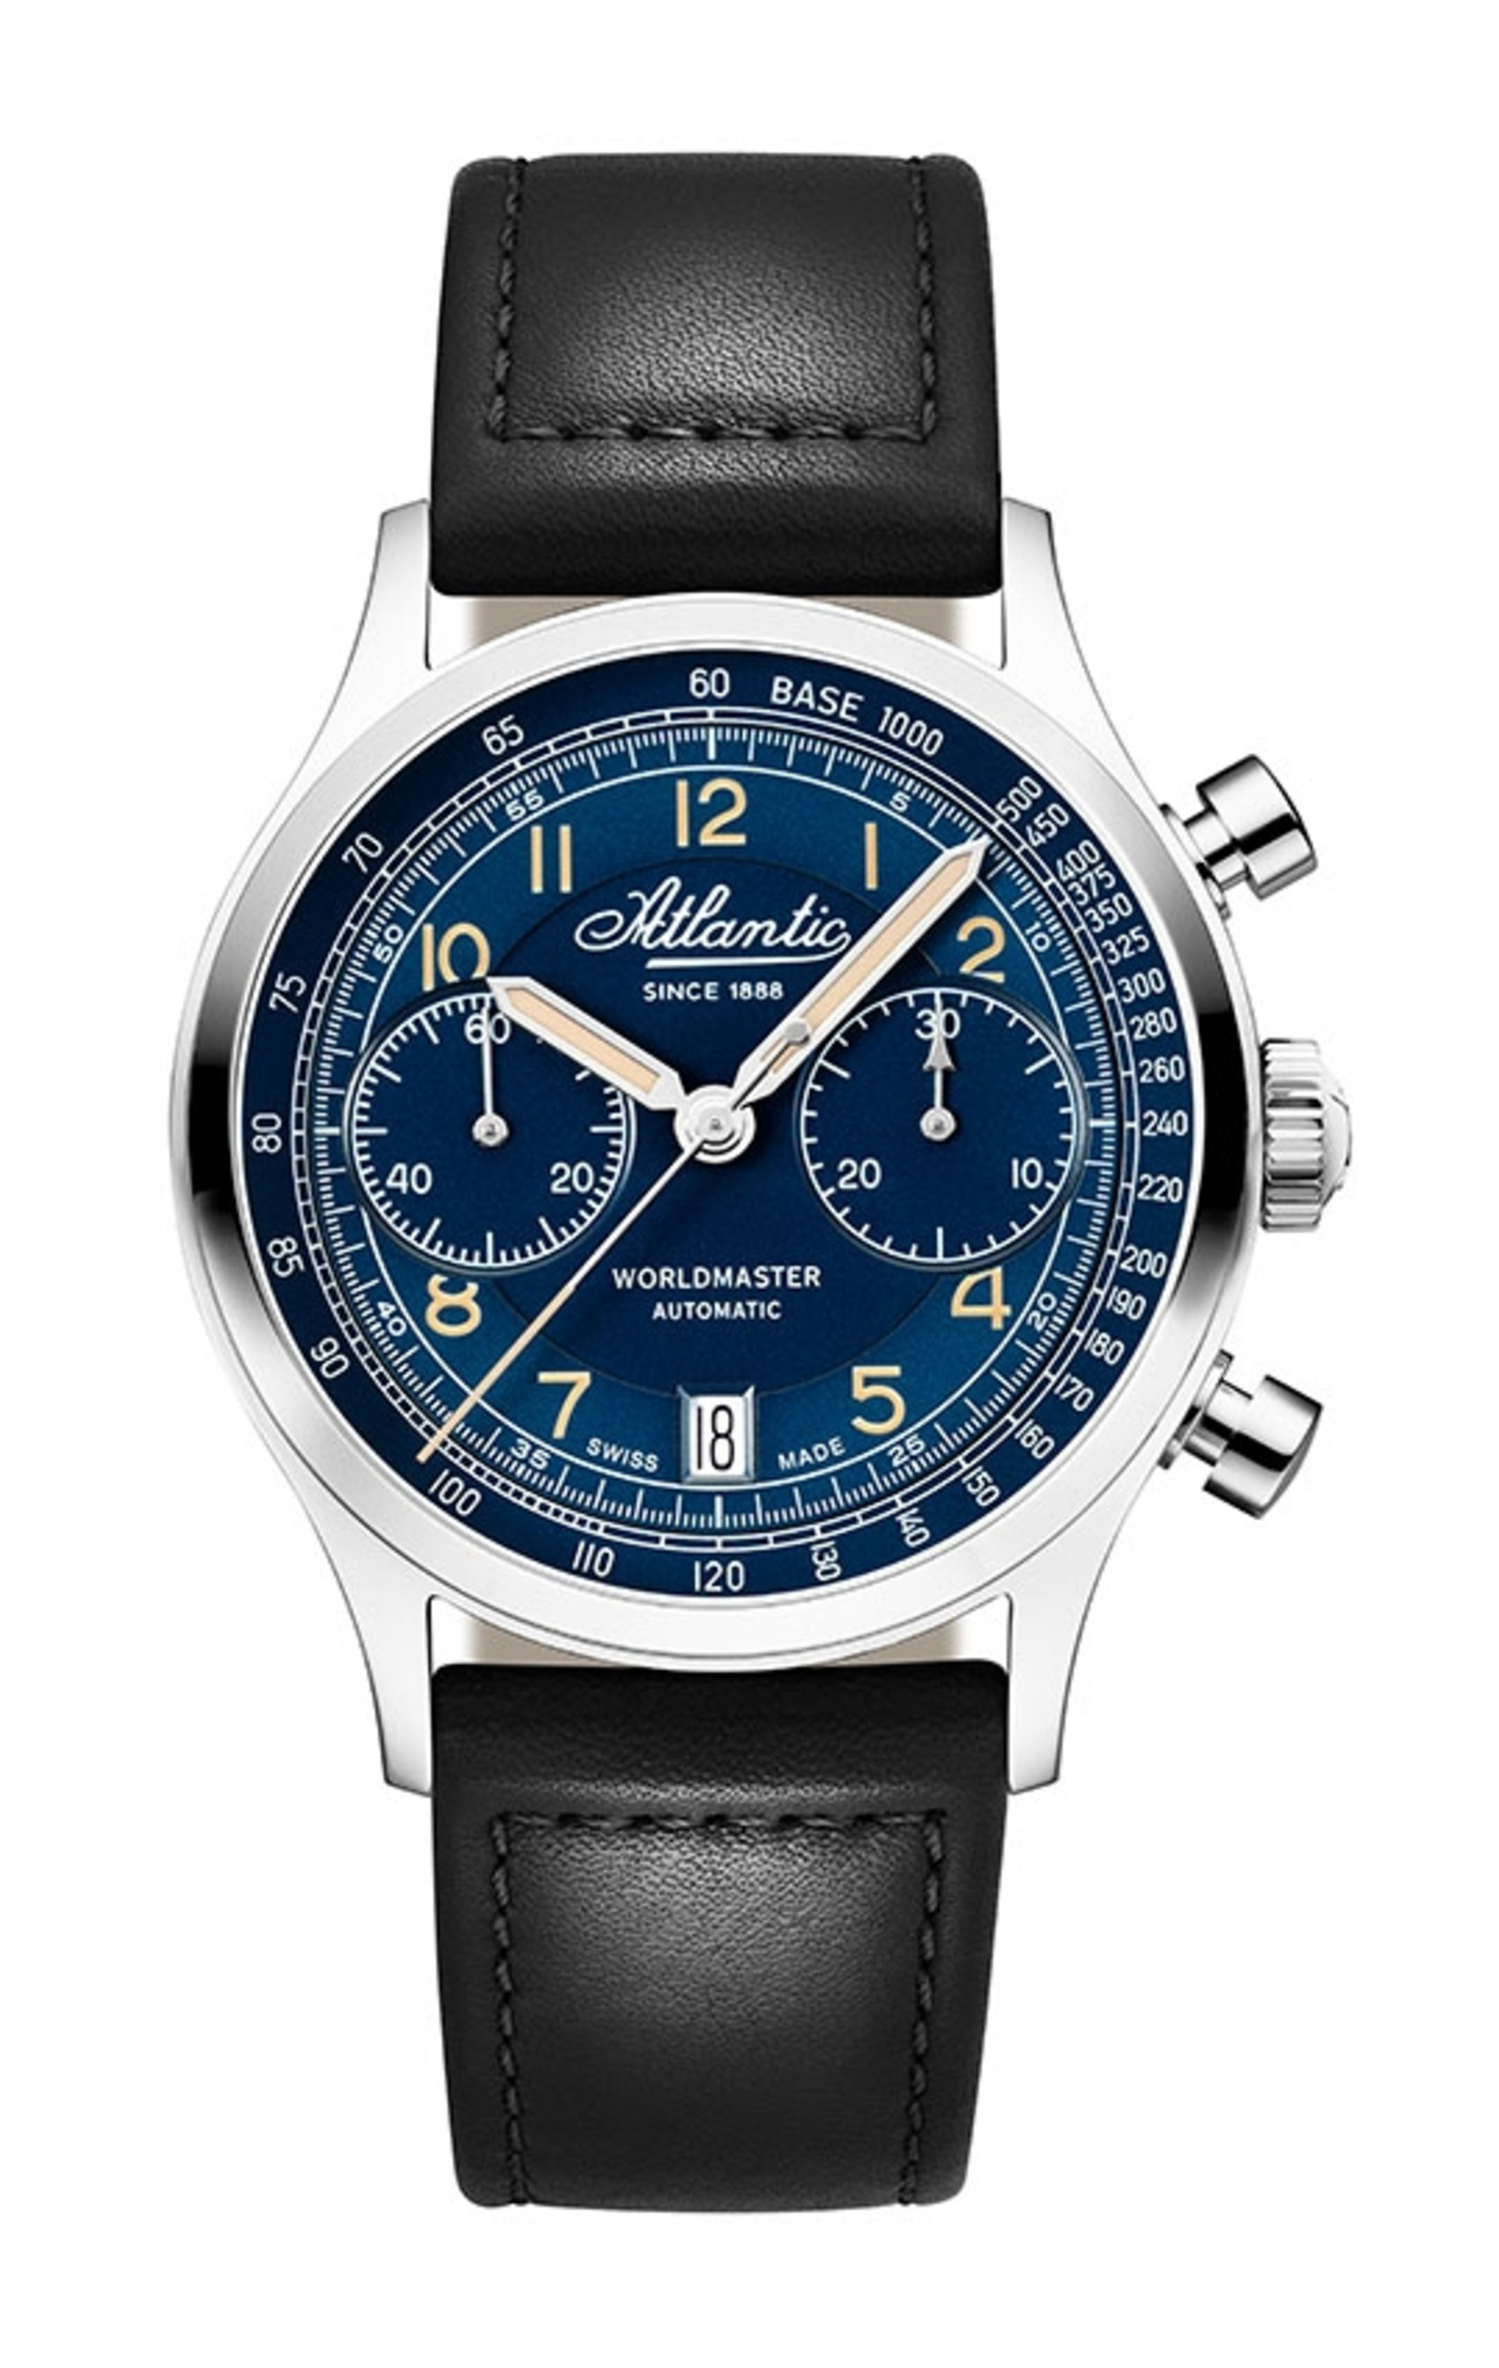 Atlantic Worldmaster Bicompax Automatic Blue with leather strap 